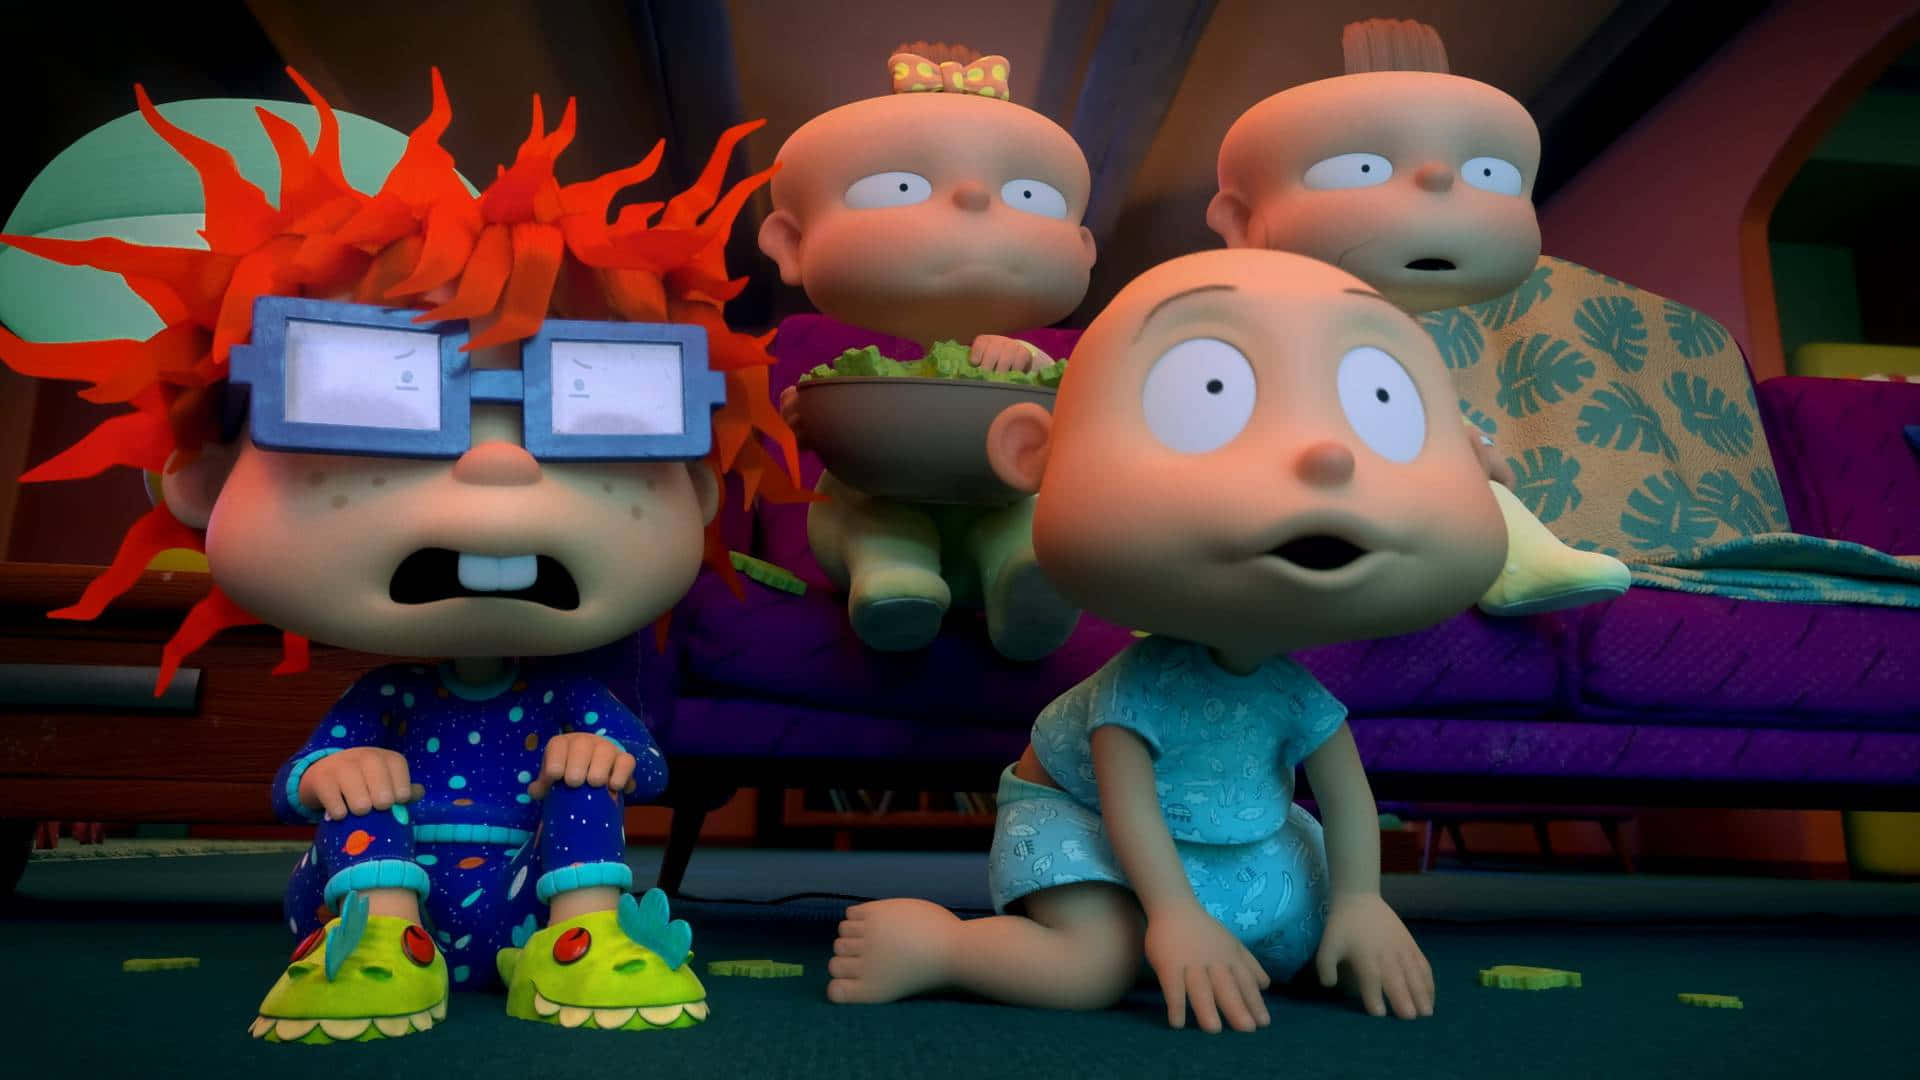 Join the Rugrats gang in their wild adventures!